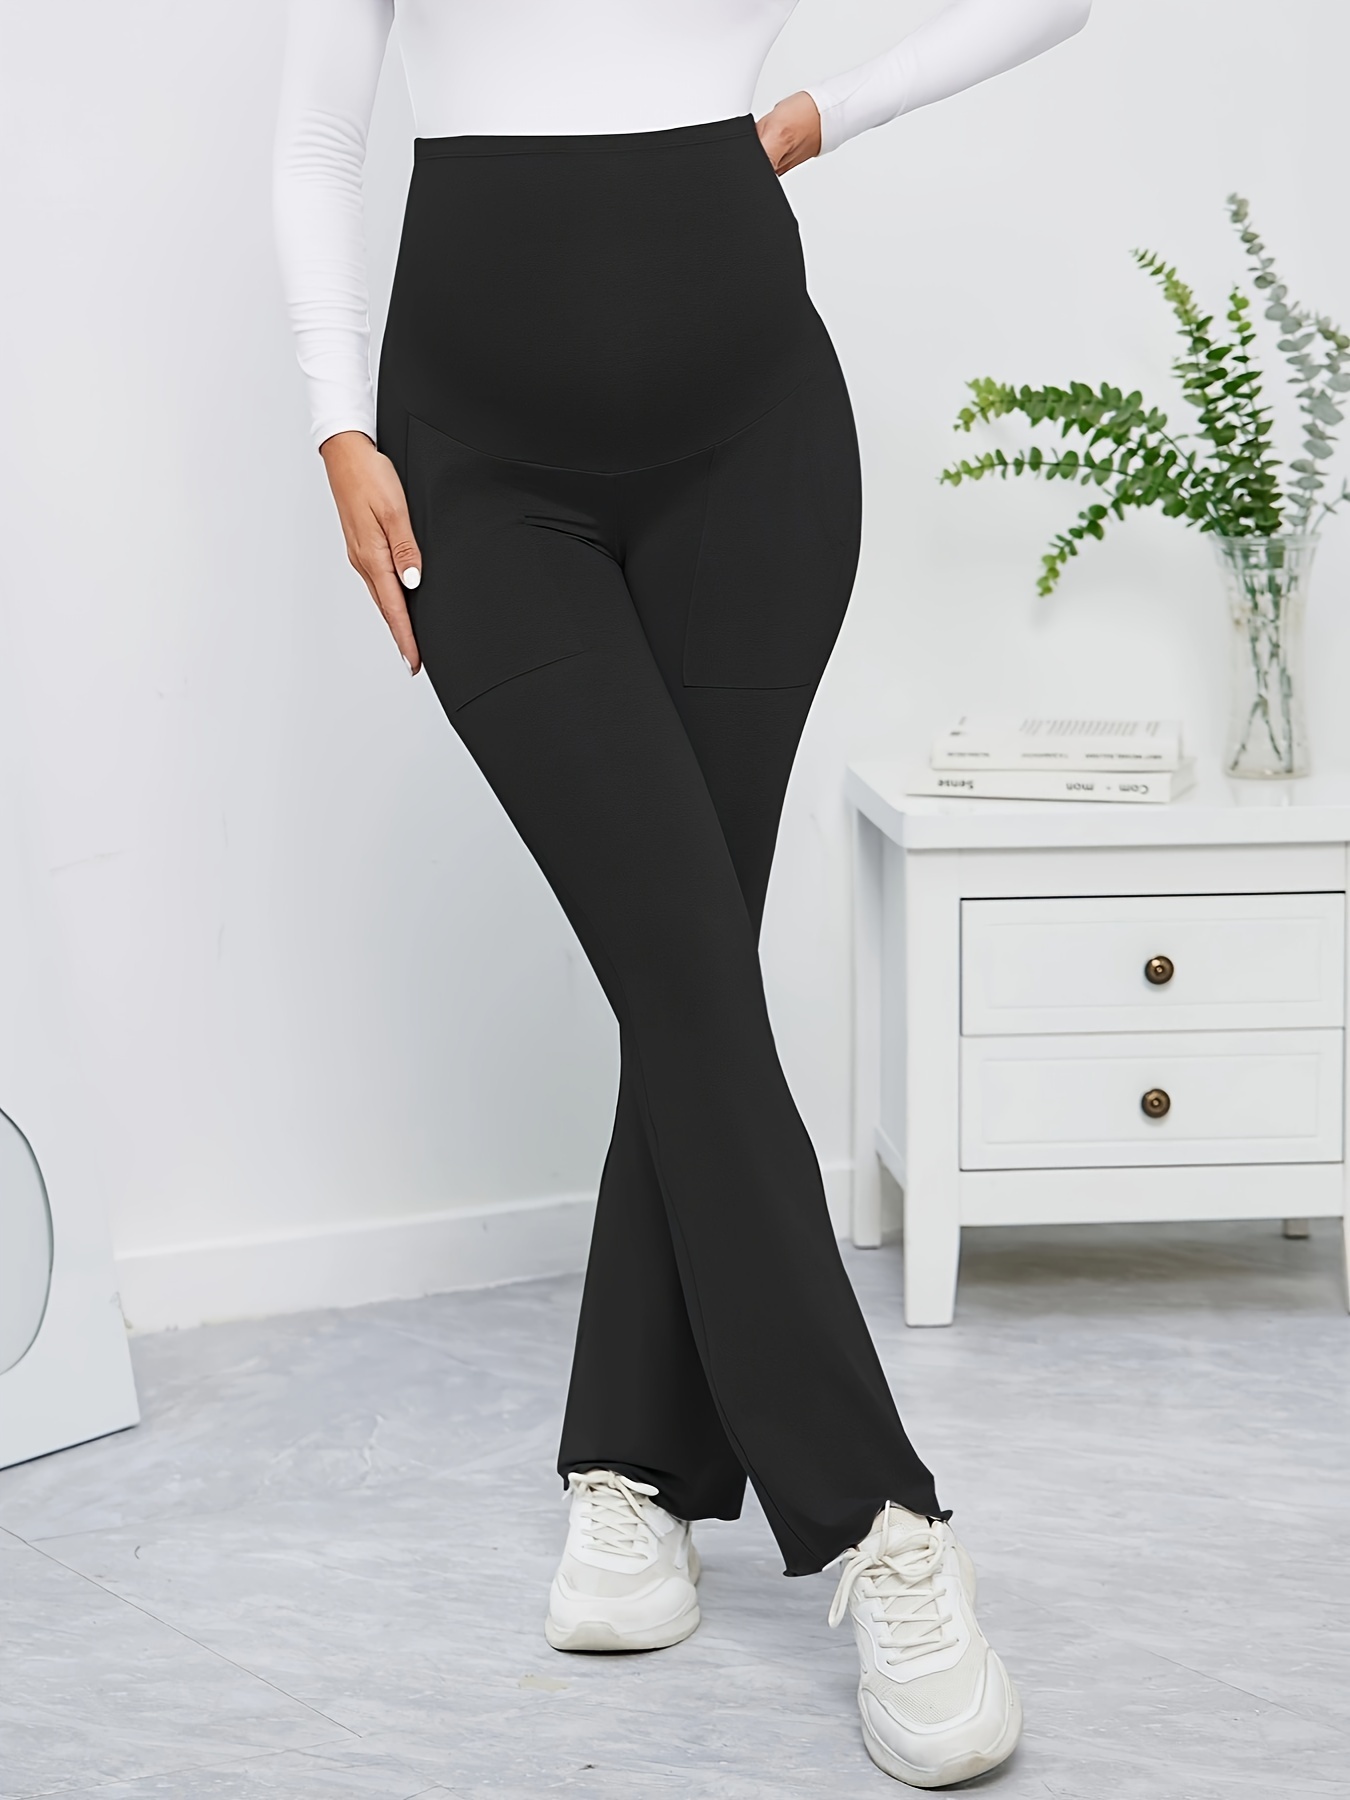 Pregnancy Pants: Warm, Stretchy, And High Waist Maternity Trousers With  Slim Fit And Fashionable Design From Ho2e, $11.11